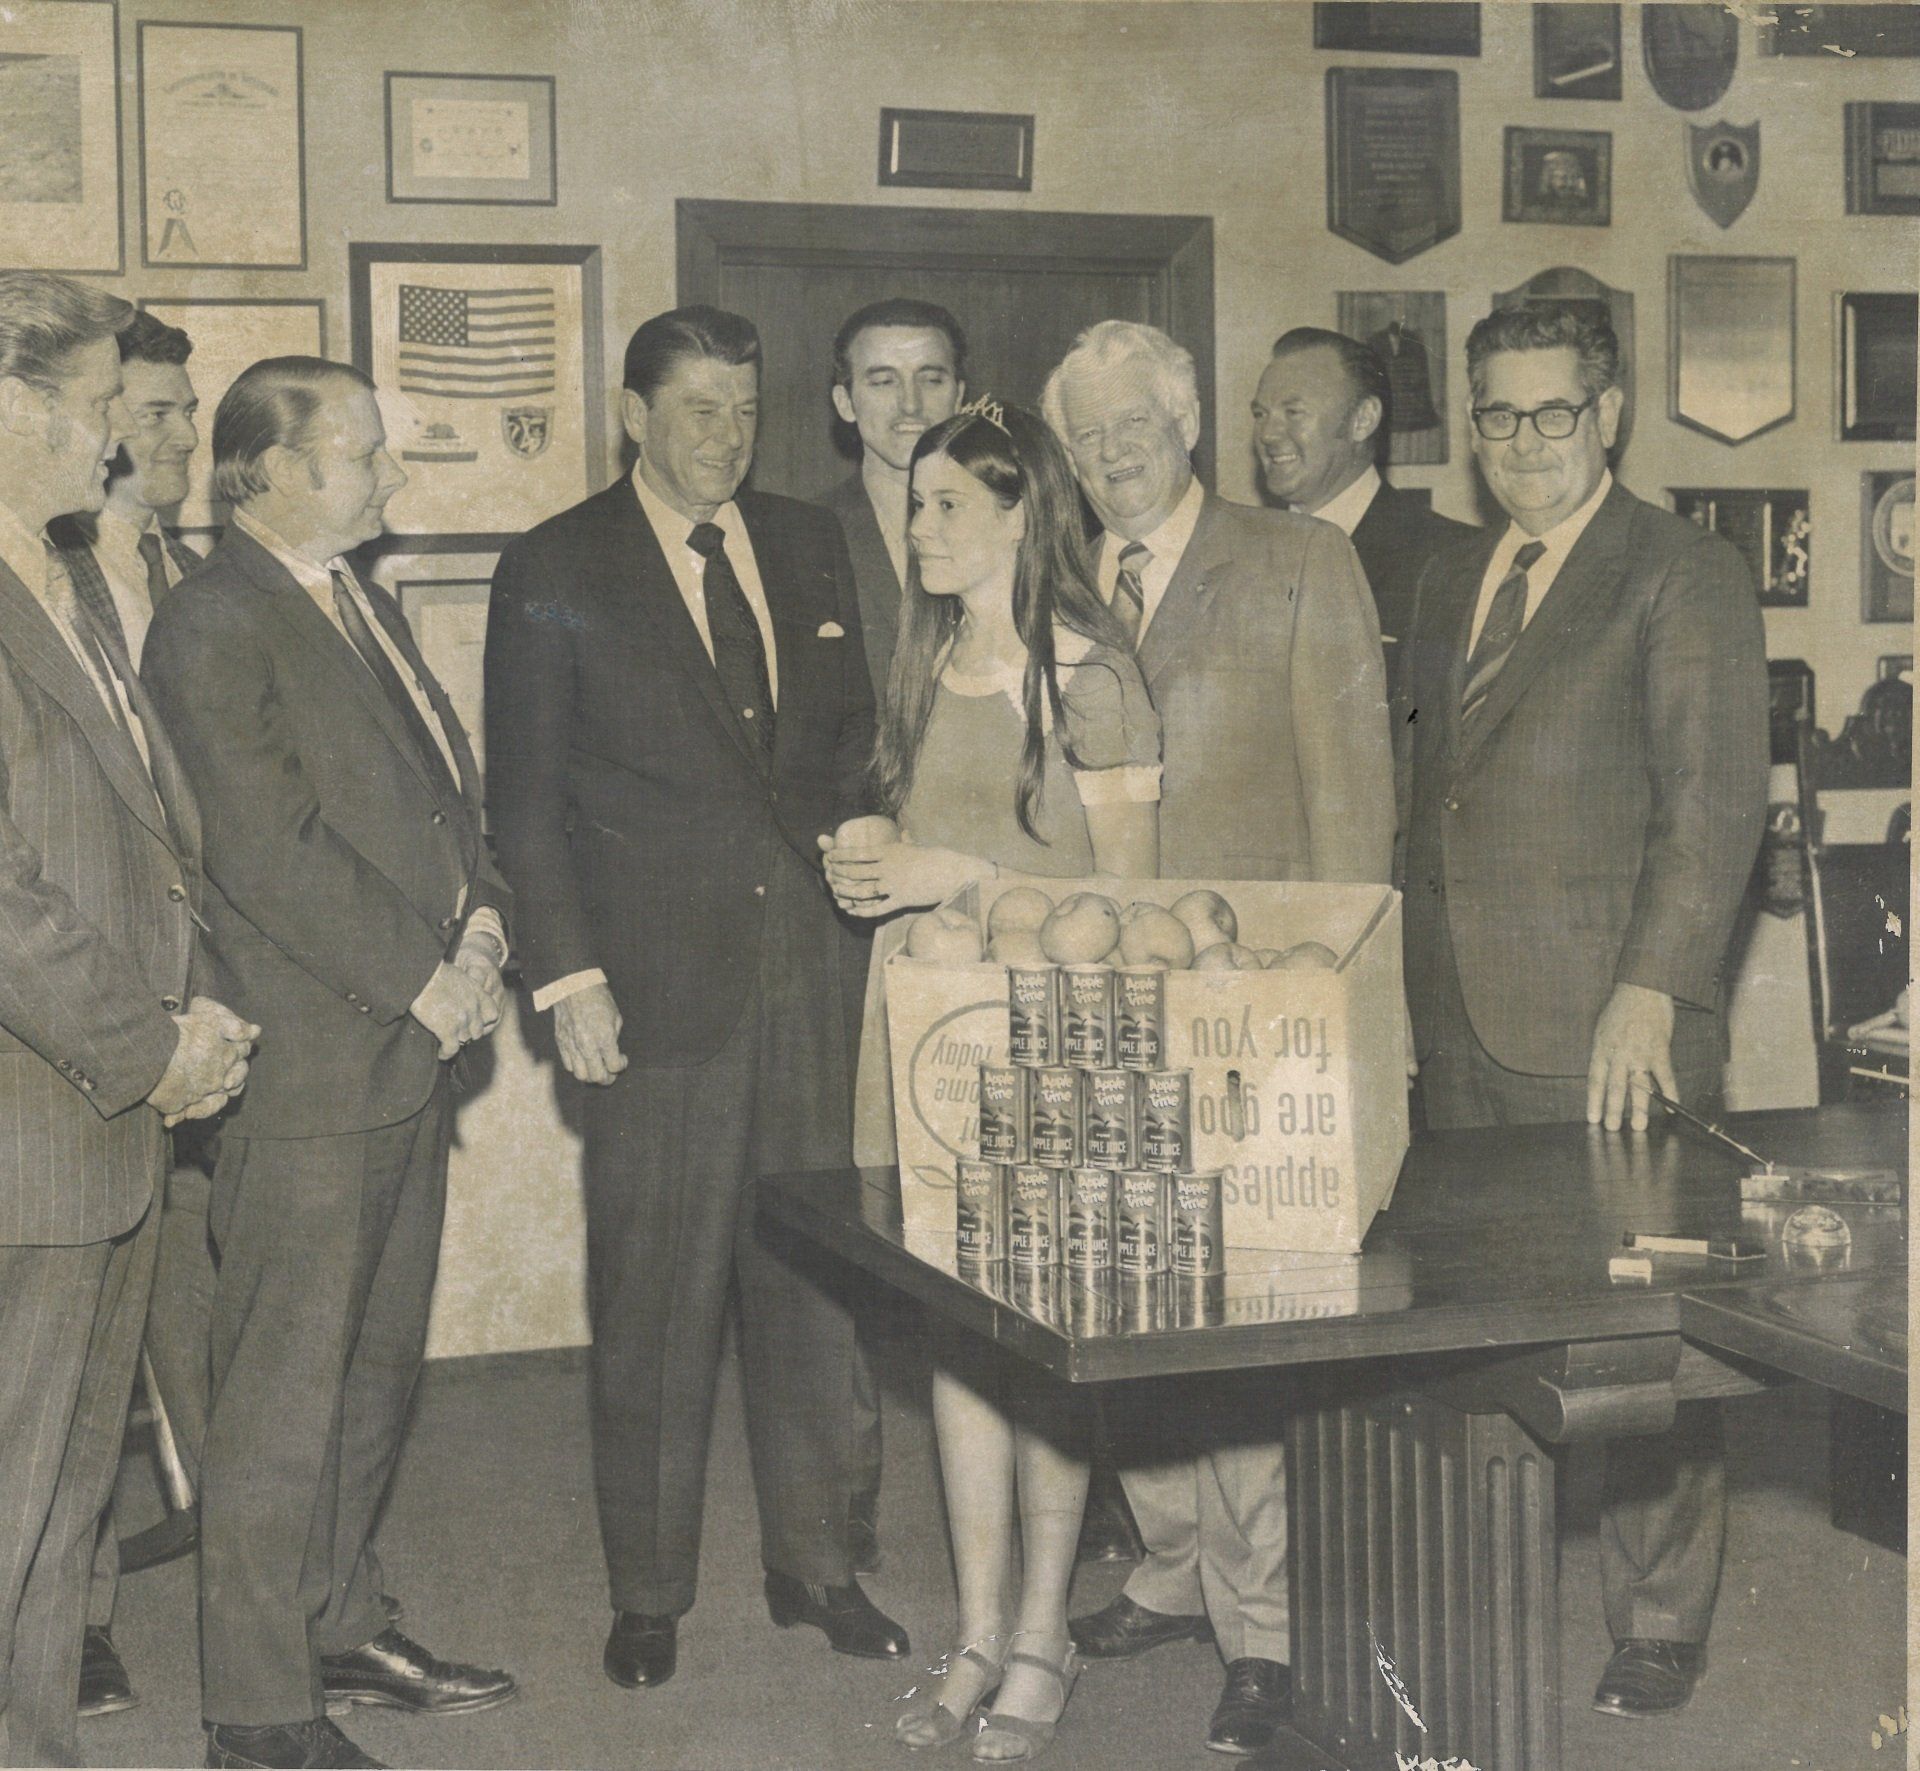 Richard Pellascini – President (at the time) of Chamber of Commerce – Presenting Governor Reagan with Gravenstein Apples from Sebastopol.